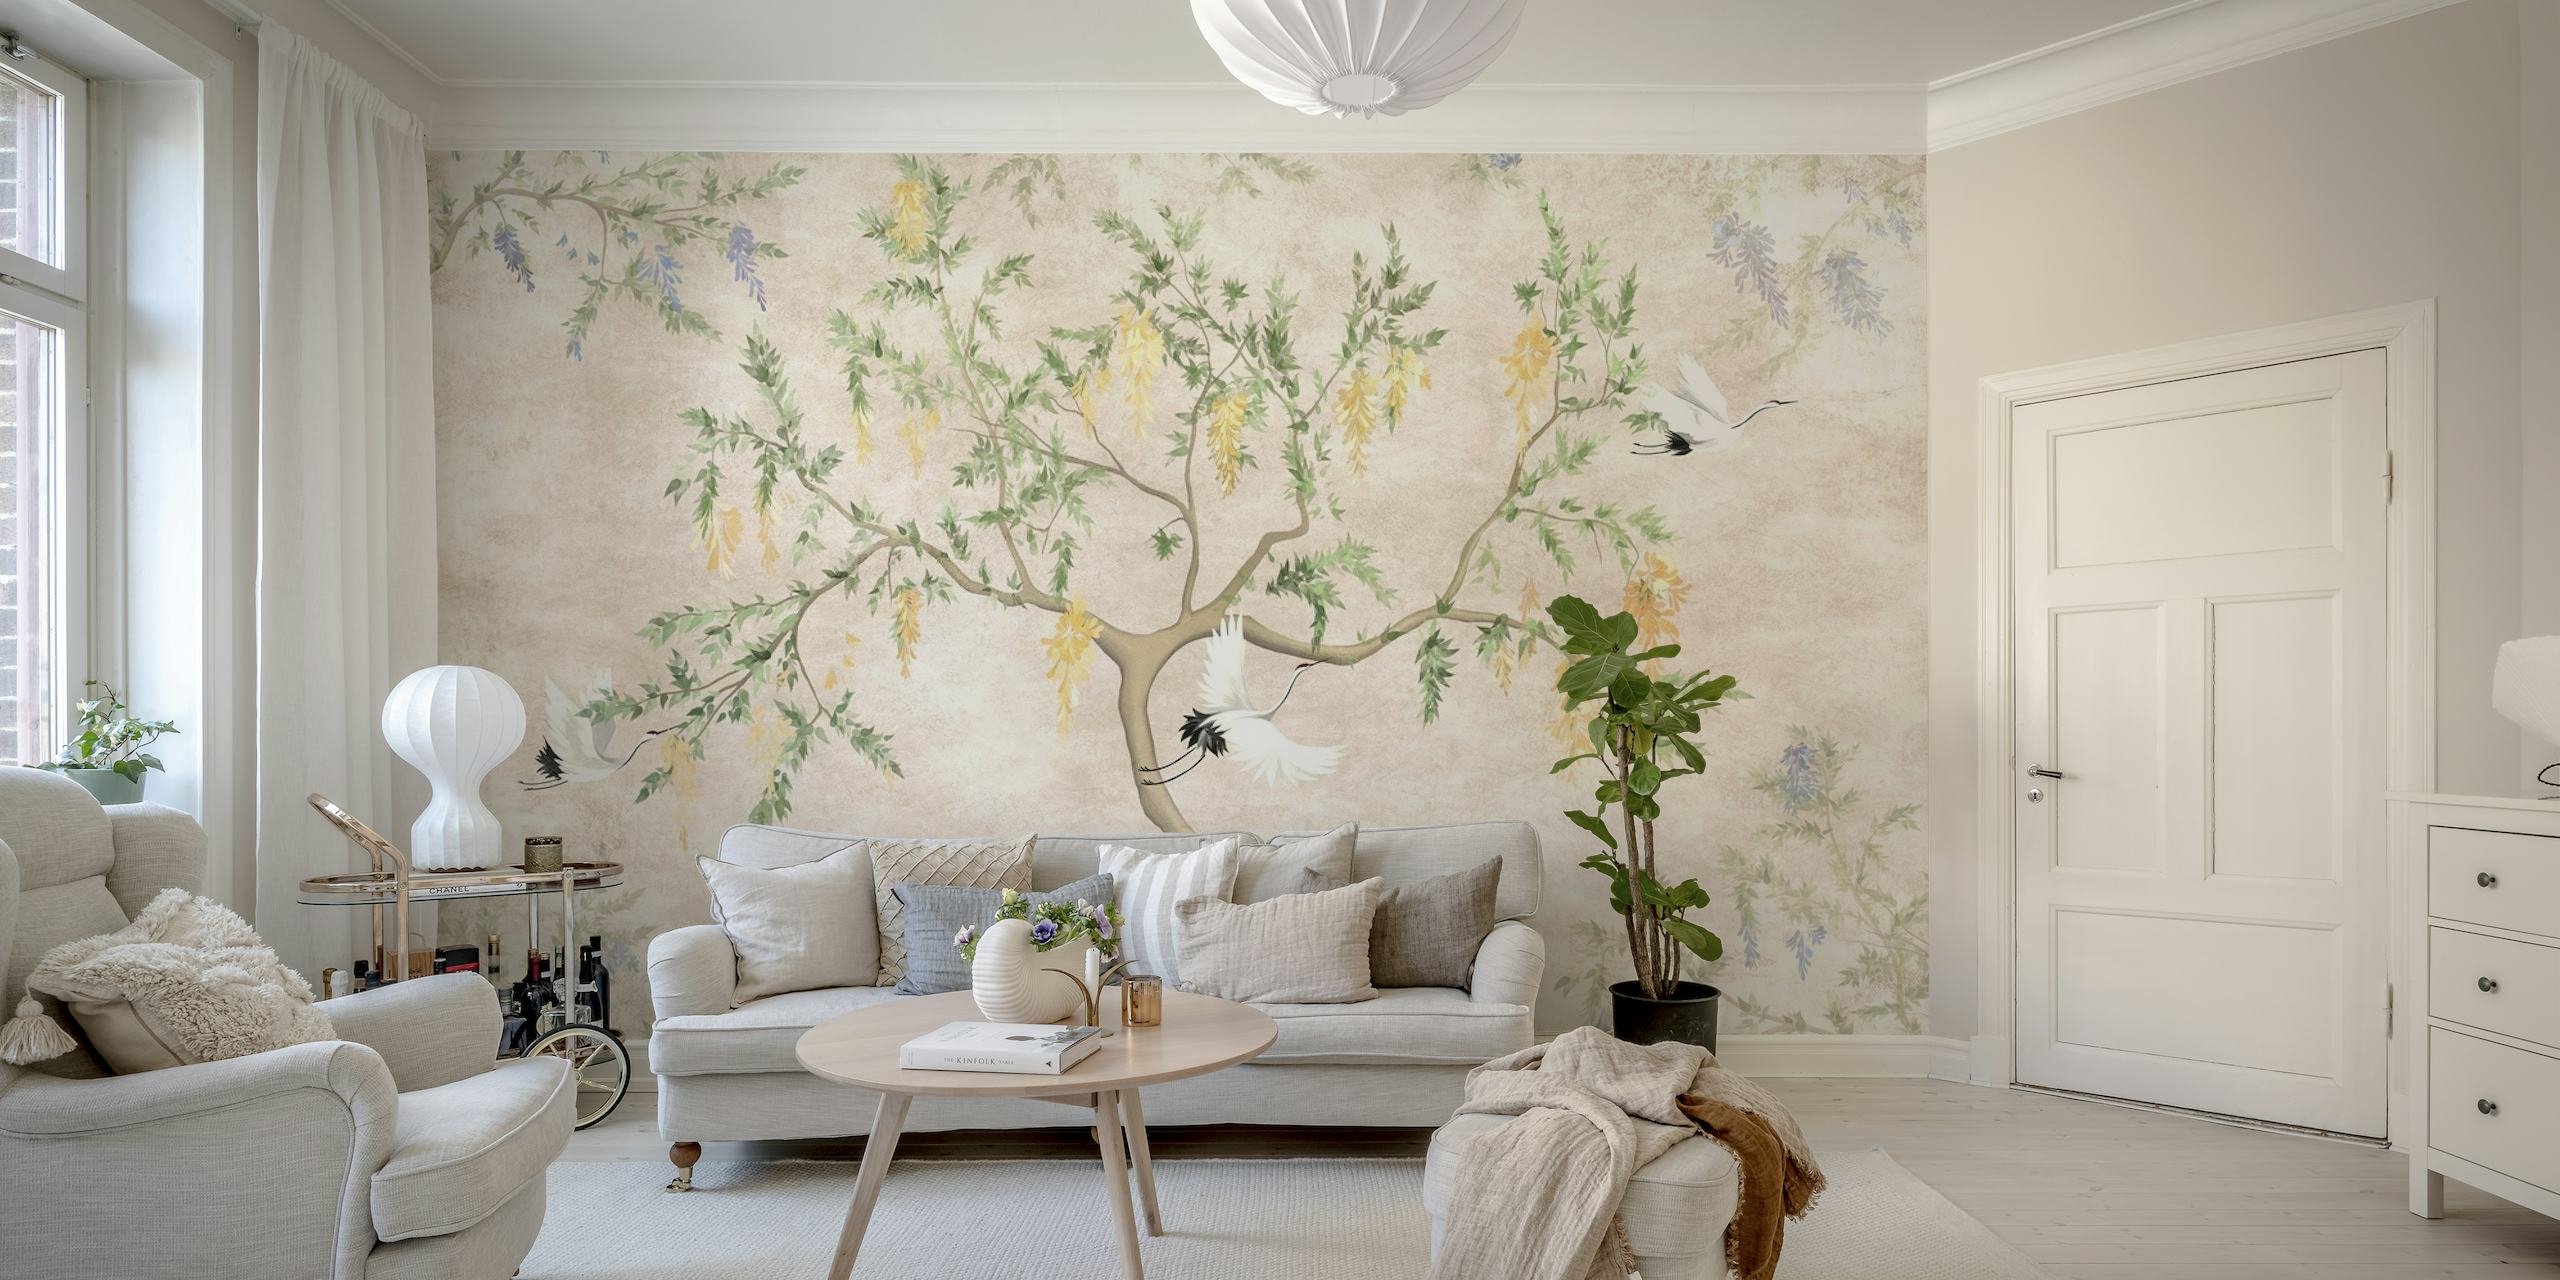 Flying cranes wall mural with pastel hues and tree branches